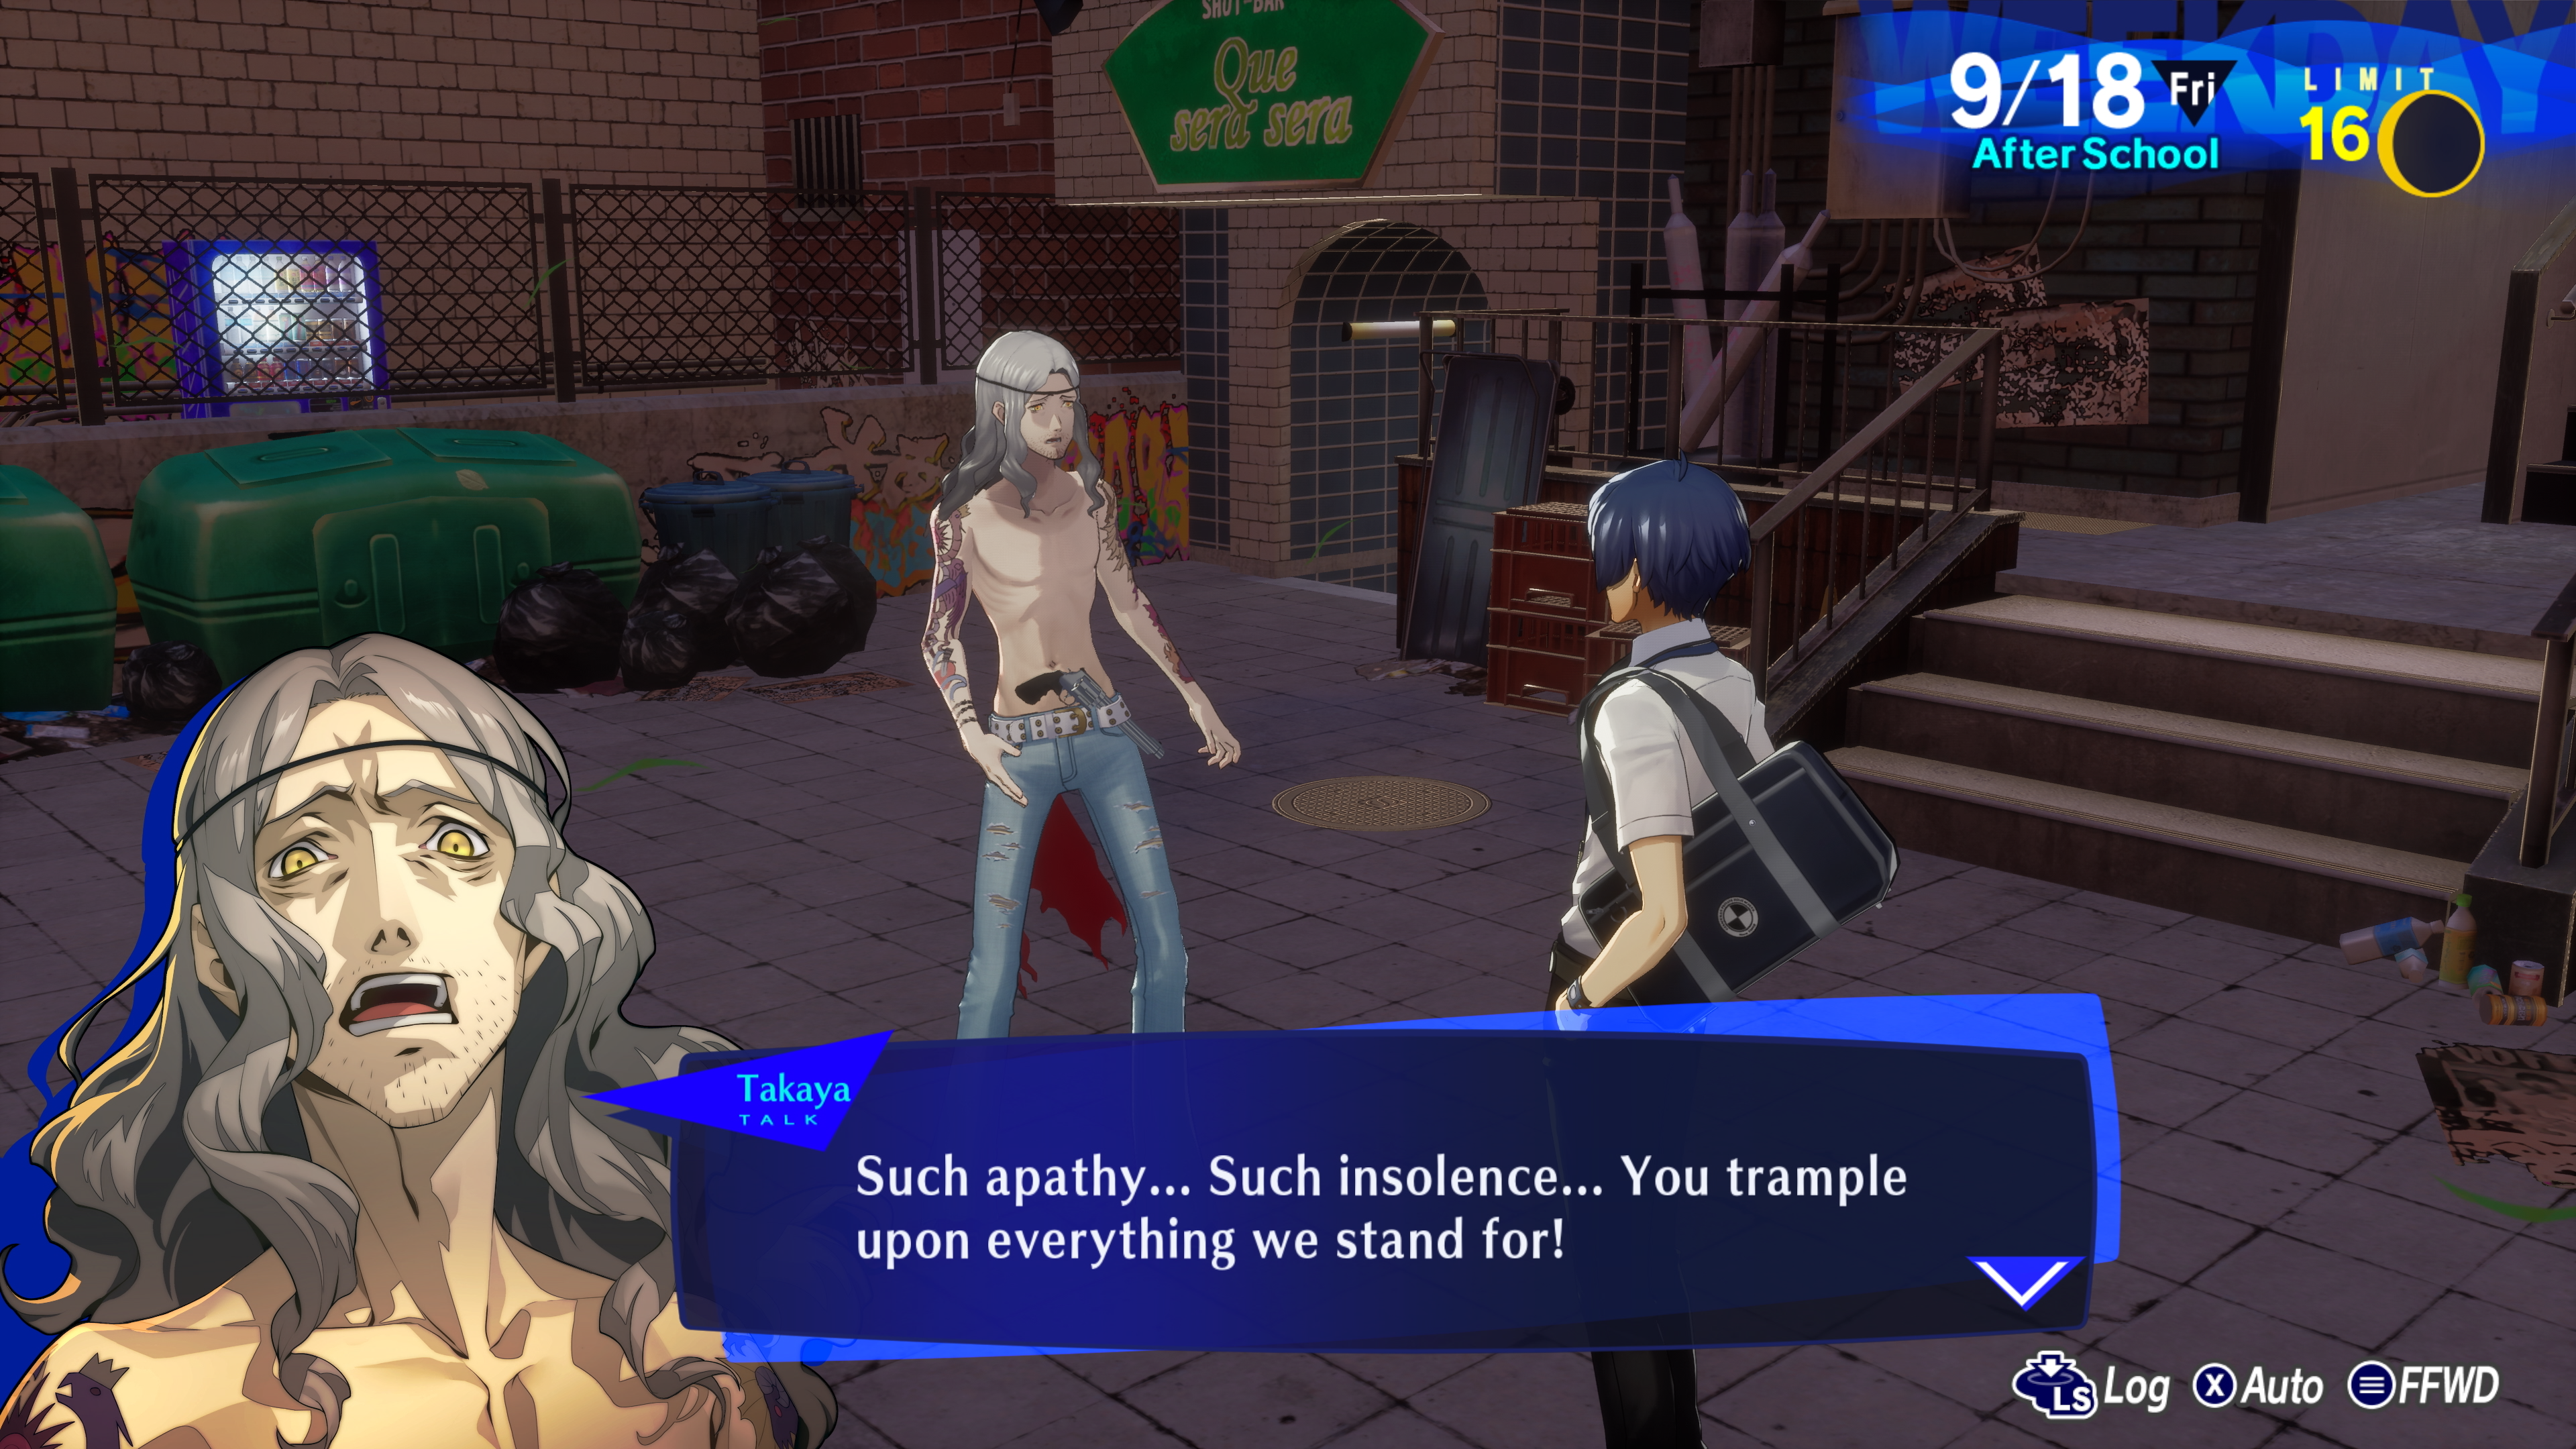 Buy Persona 3 Reload Digital Premium Edition from the Humble Store